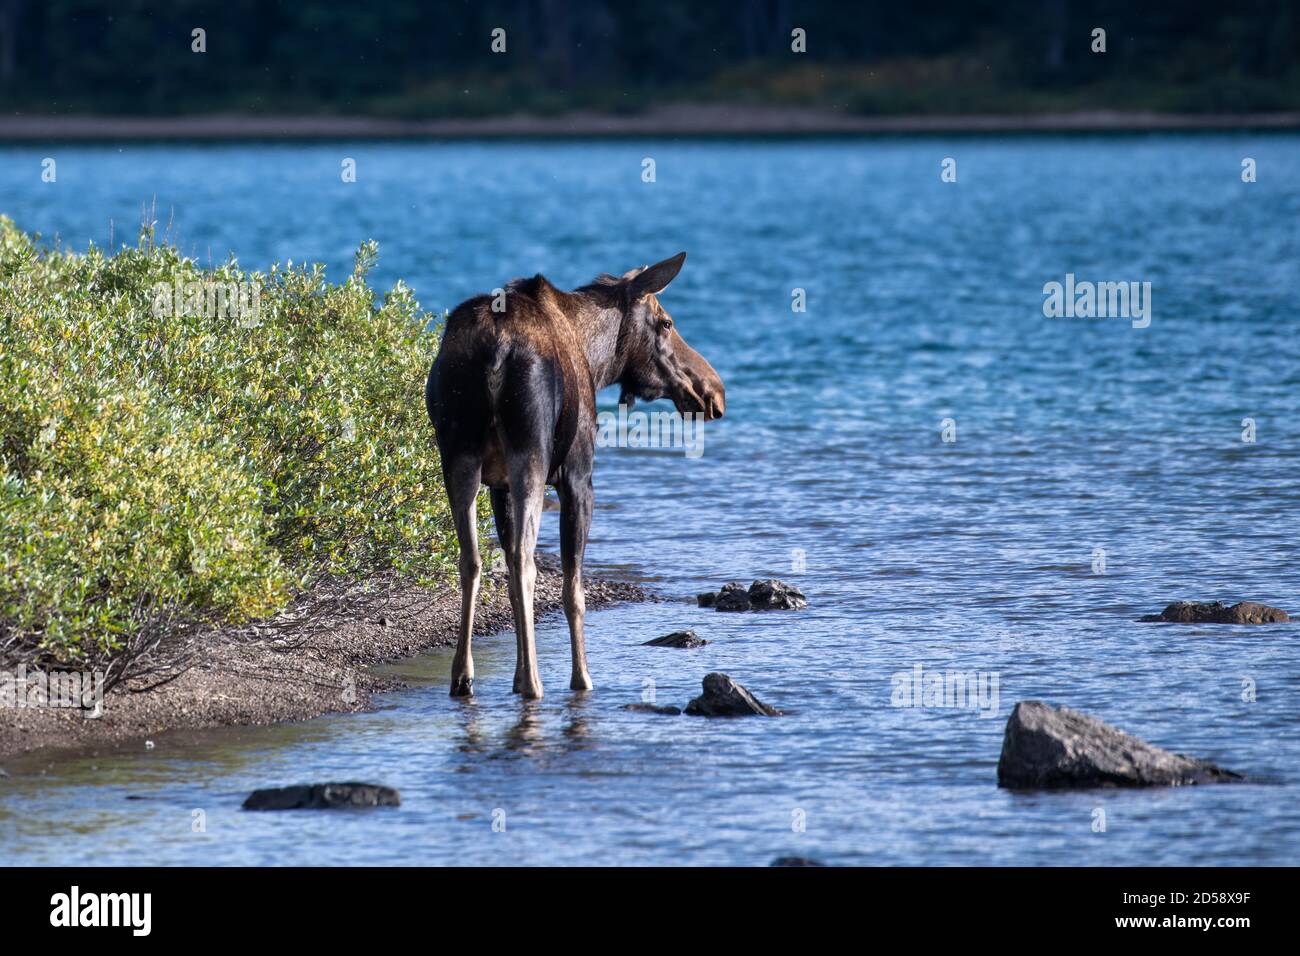 Rear view of a Canadian Moose standing in Maligne Lake, Jasper National Park, Alberta, Canada Stock Photo